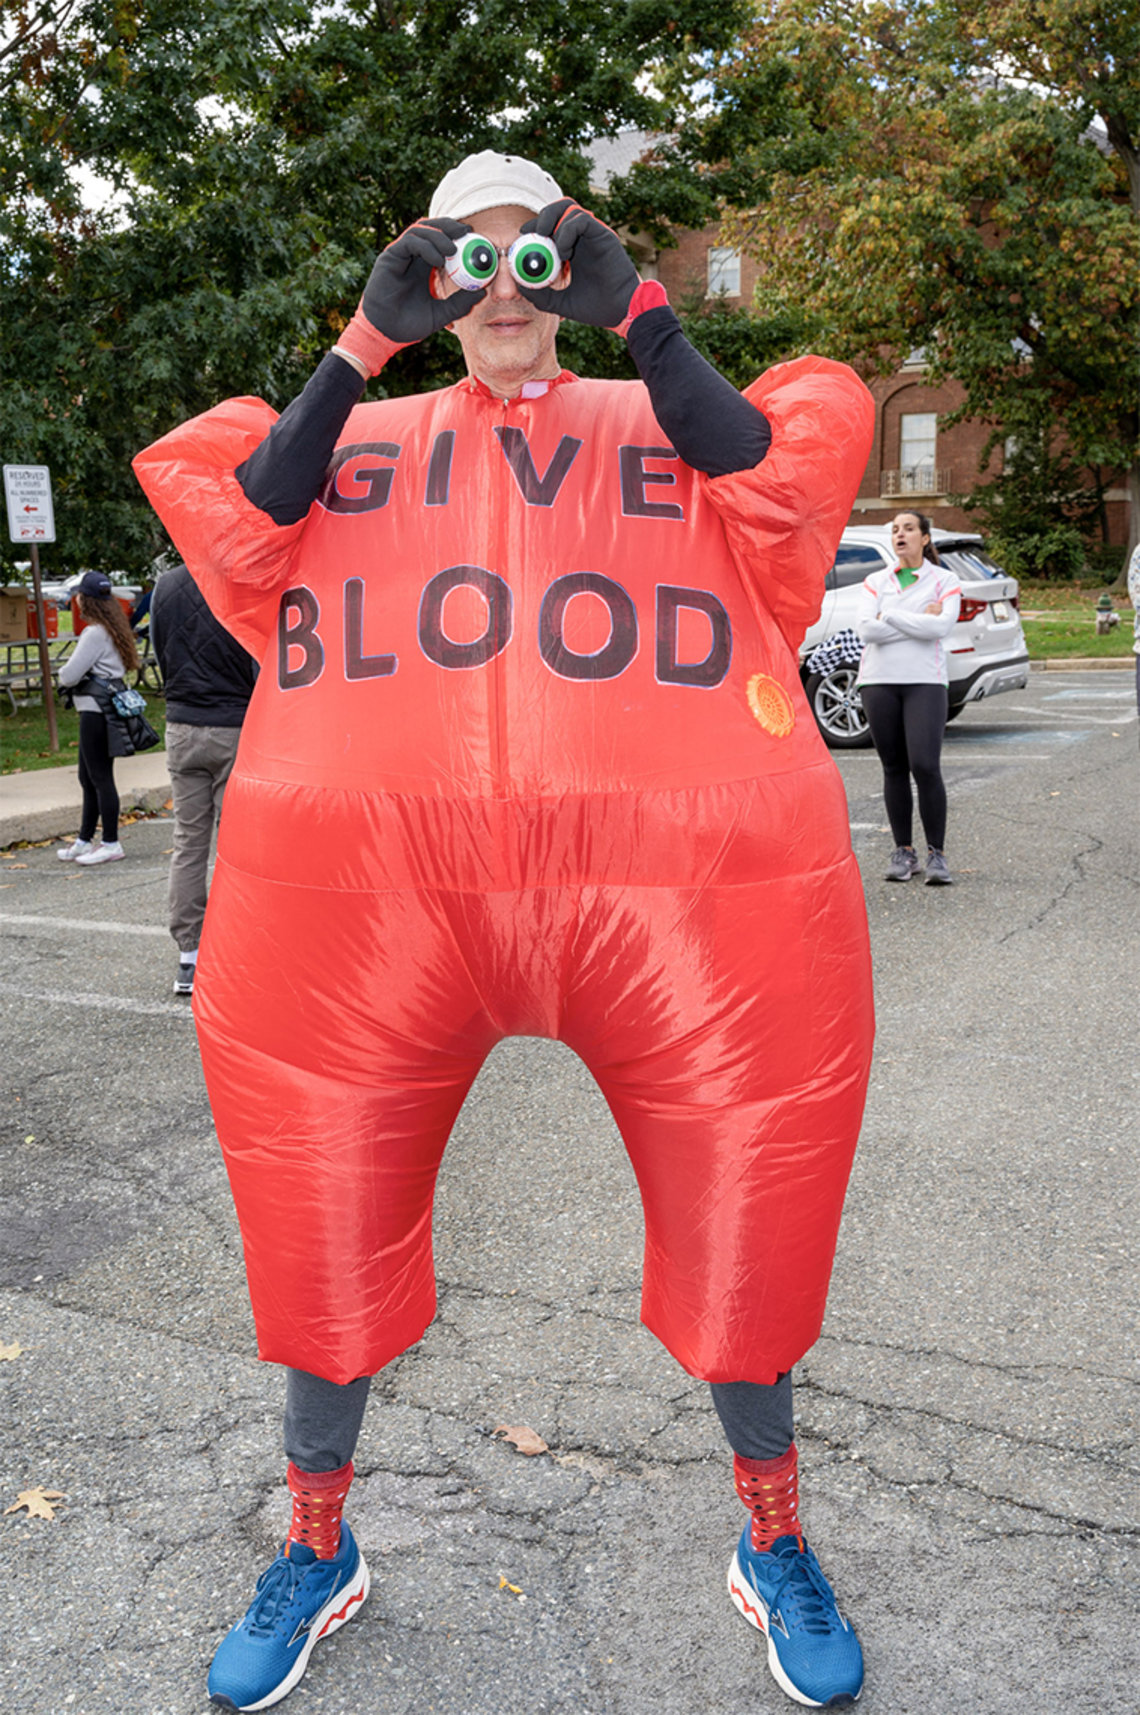 Hayes in red, inflatable costume that reads "Give Blood," holds 2 plastic eyeballs over his eyes outside, in front of Bldg. 1.